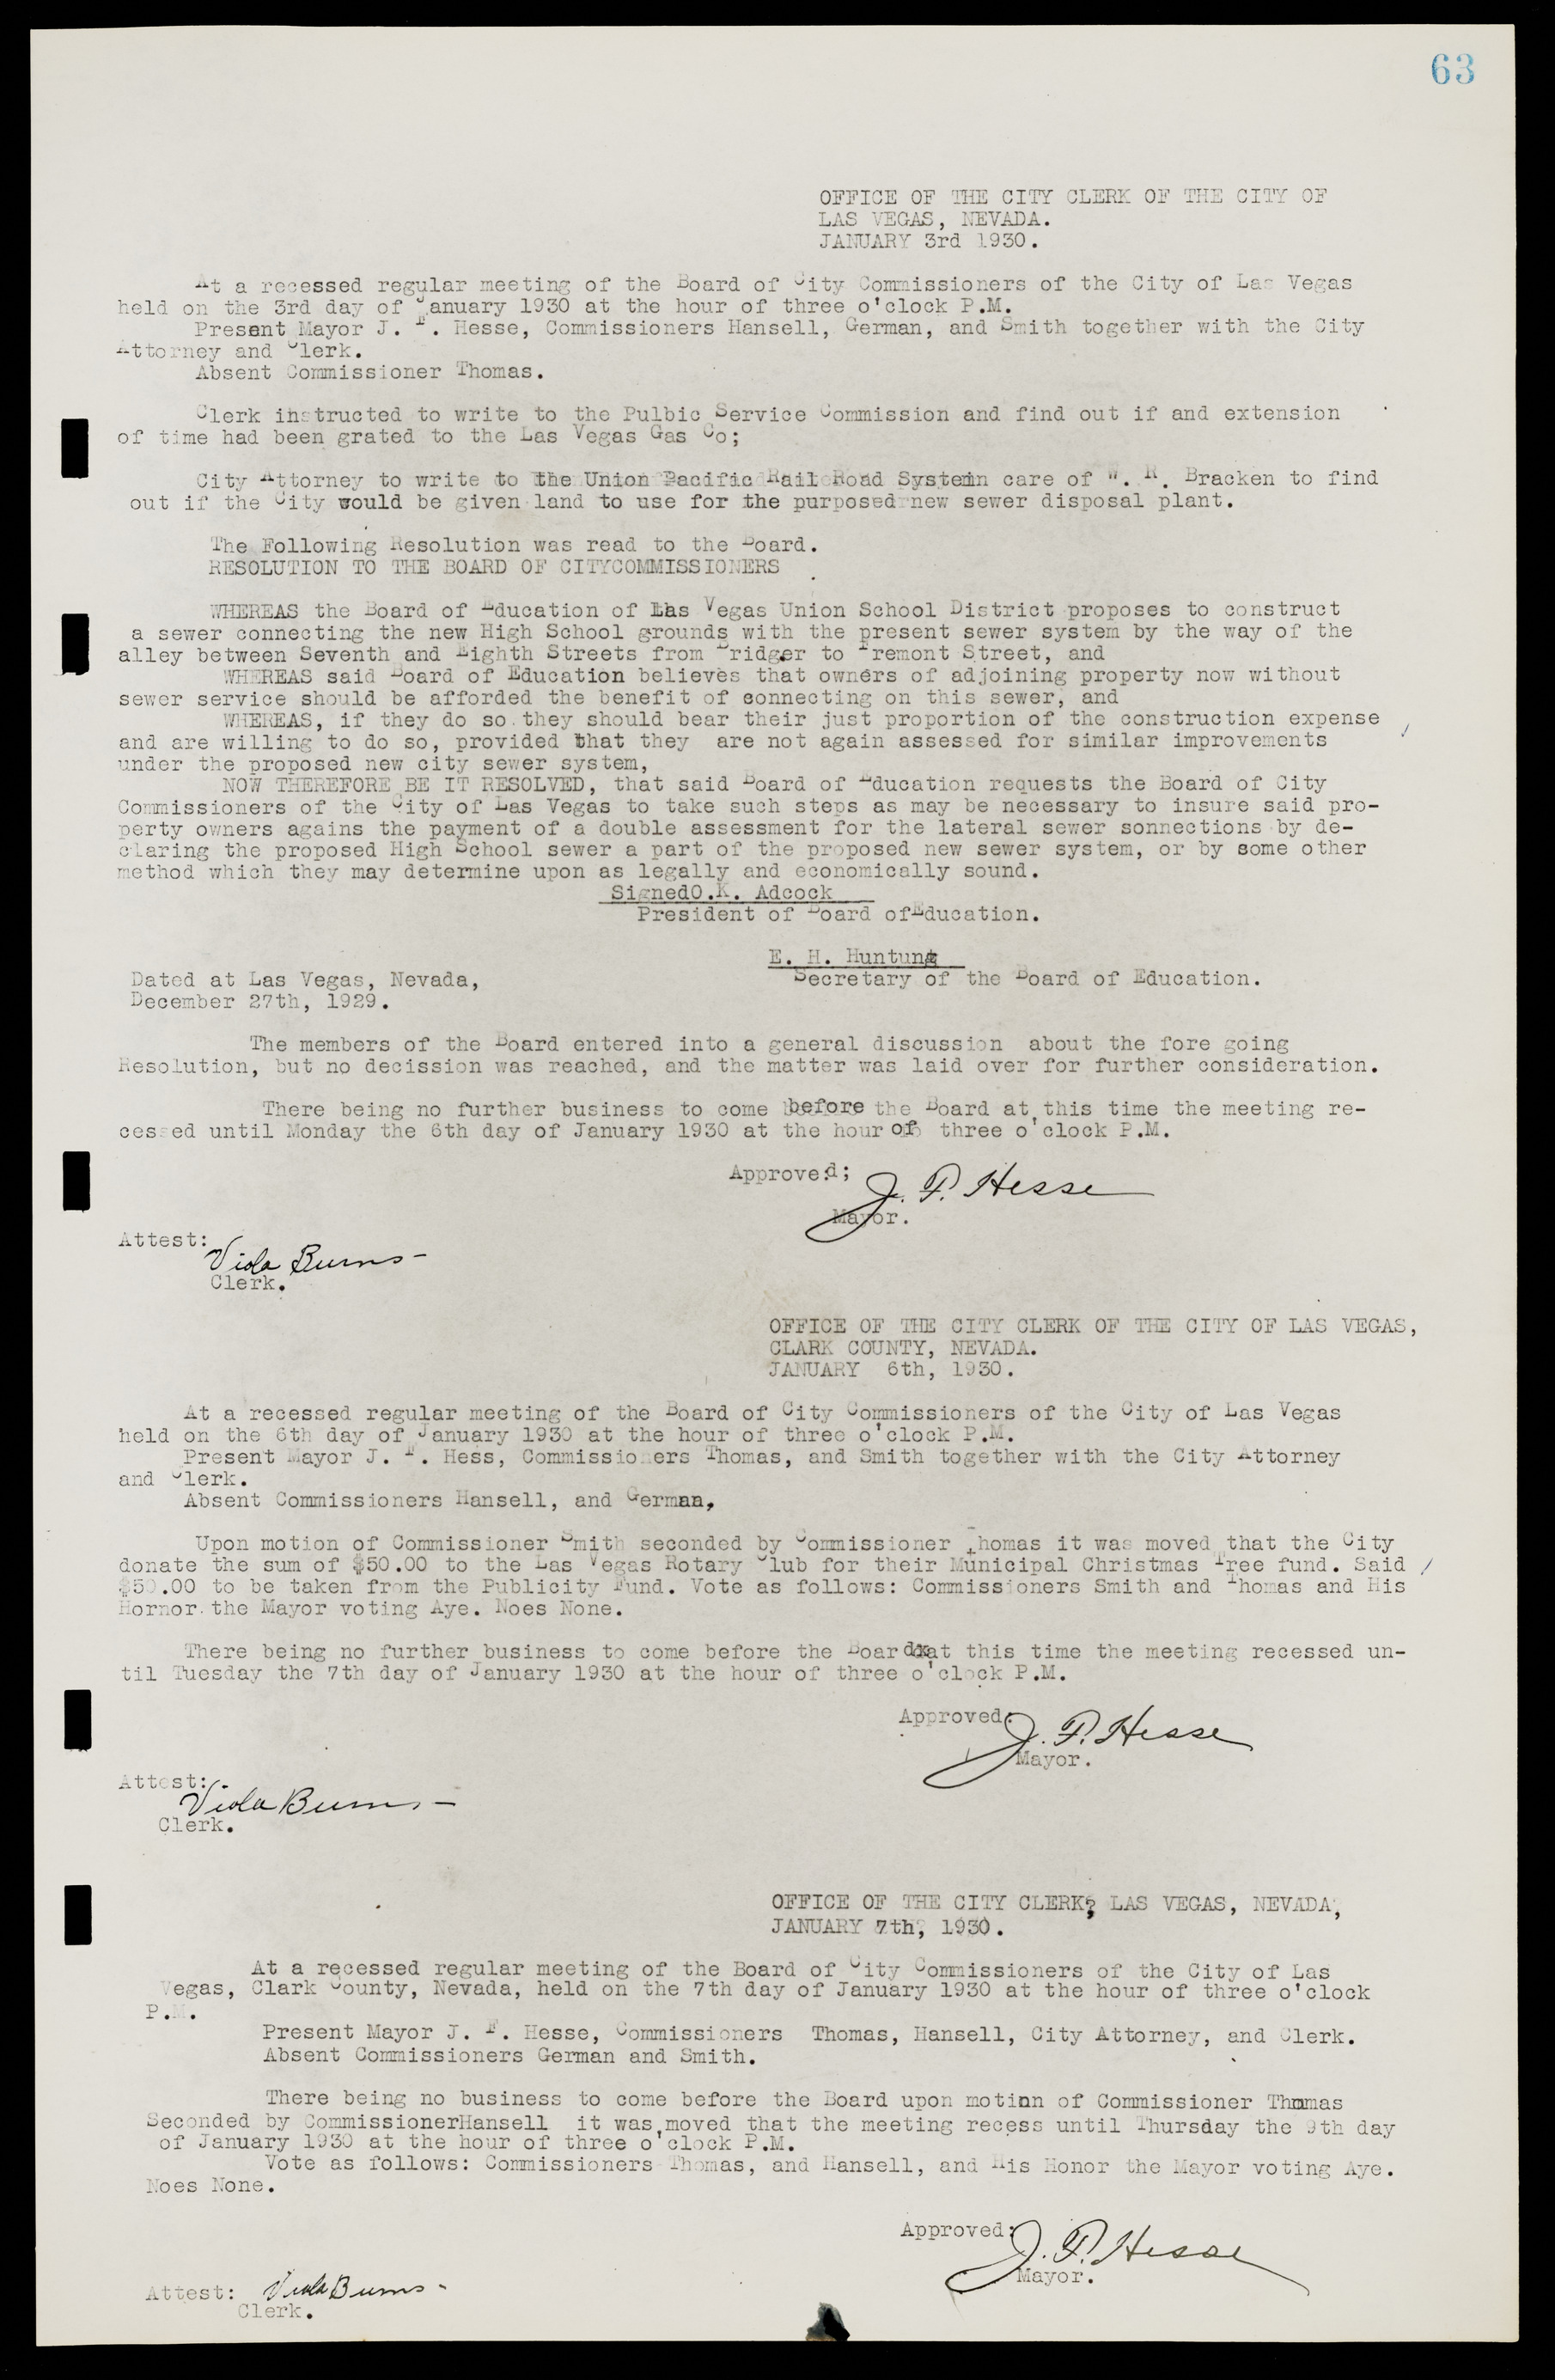 Las Vegas City Commission Minutes, May 14, 1929 to February 11, 1937, lvc000003-69